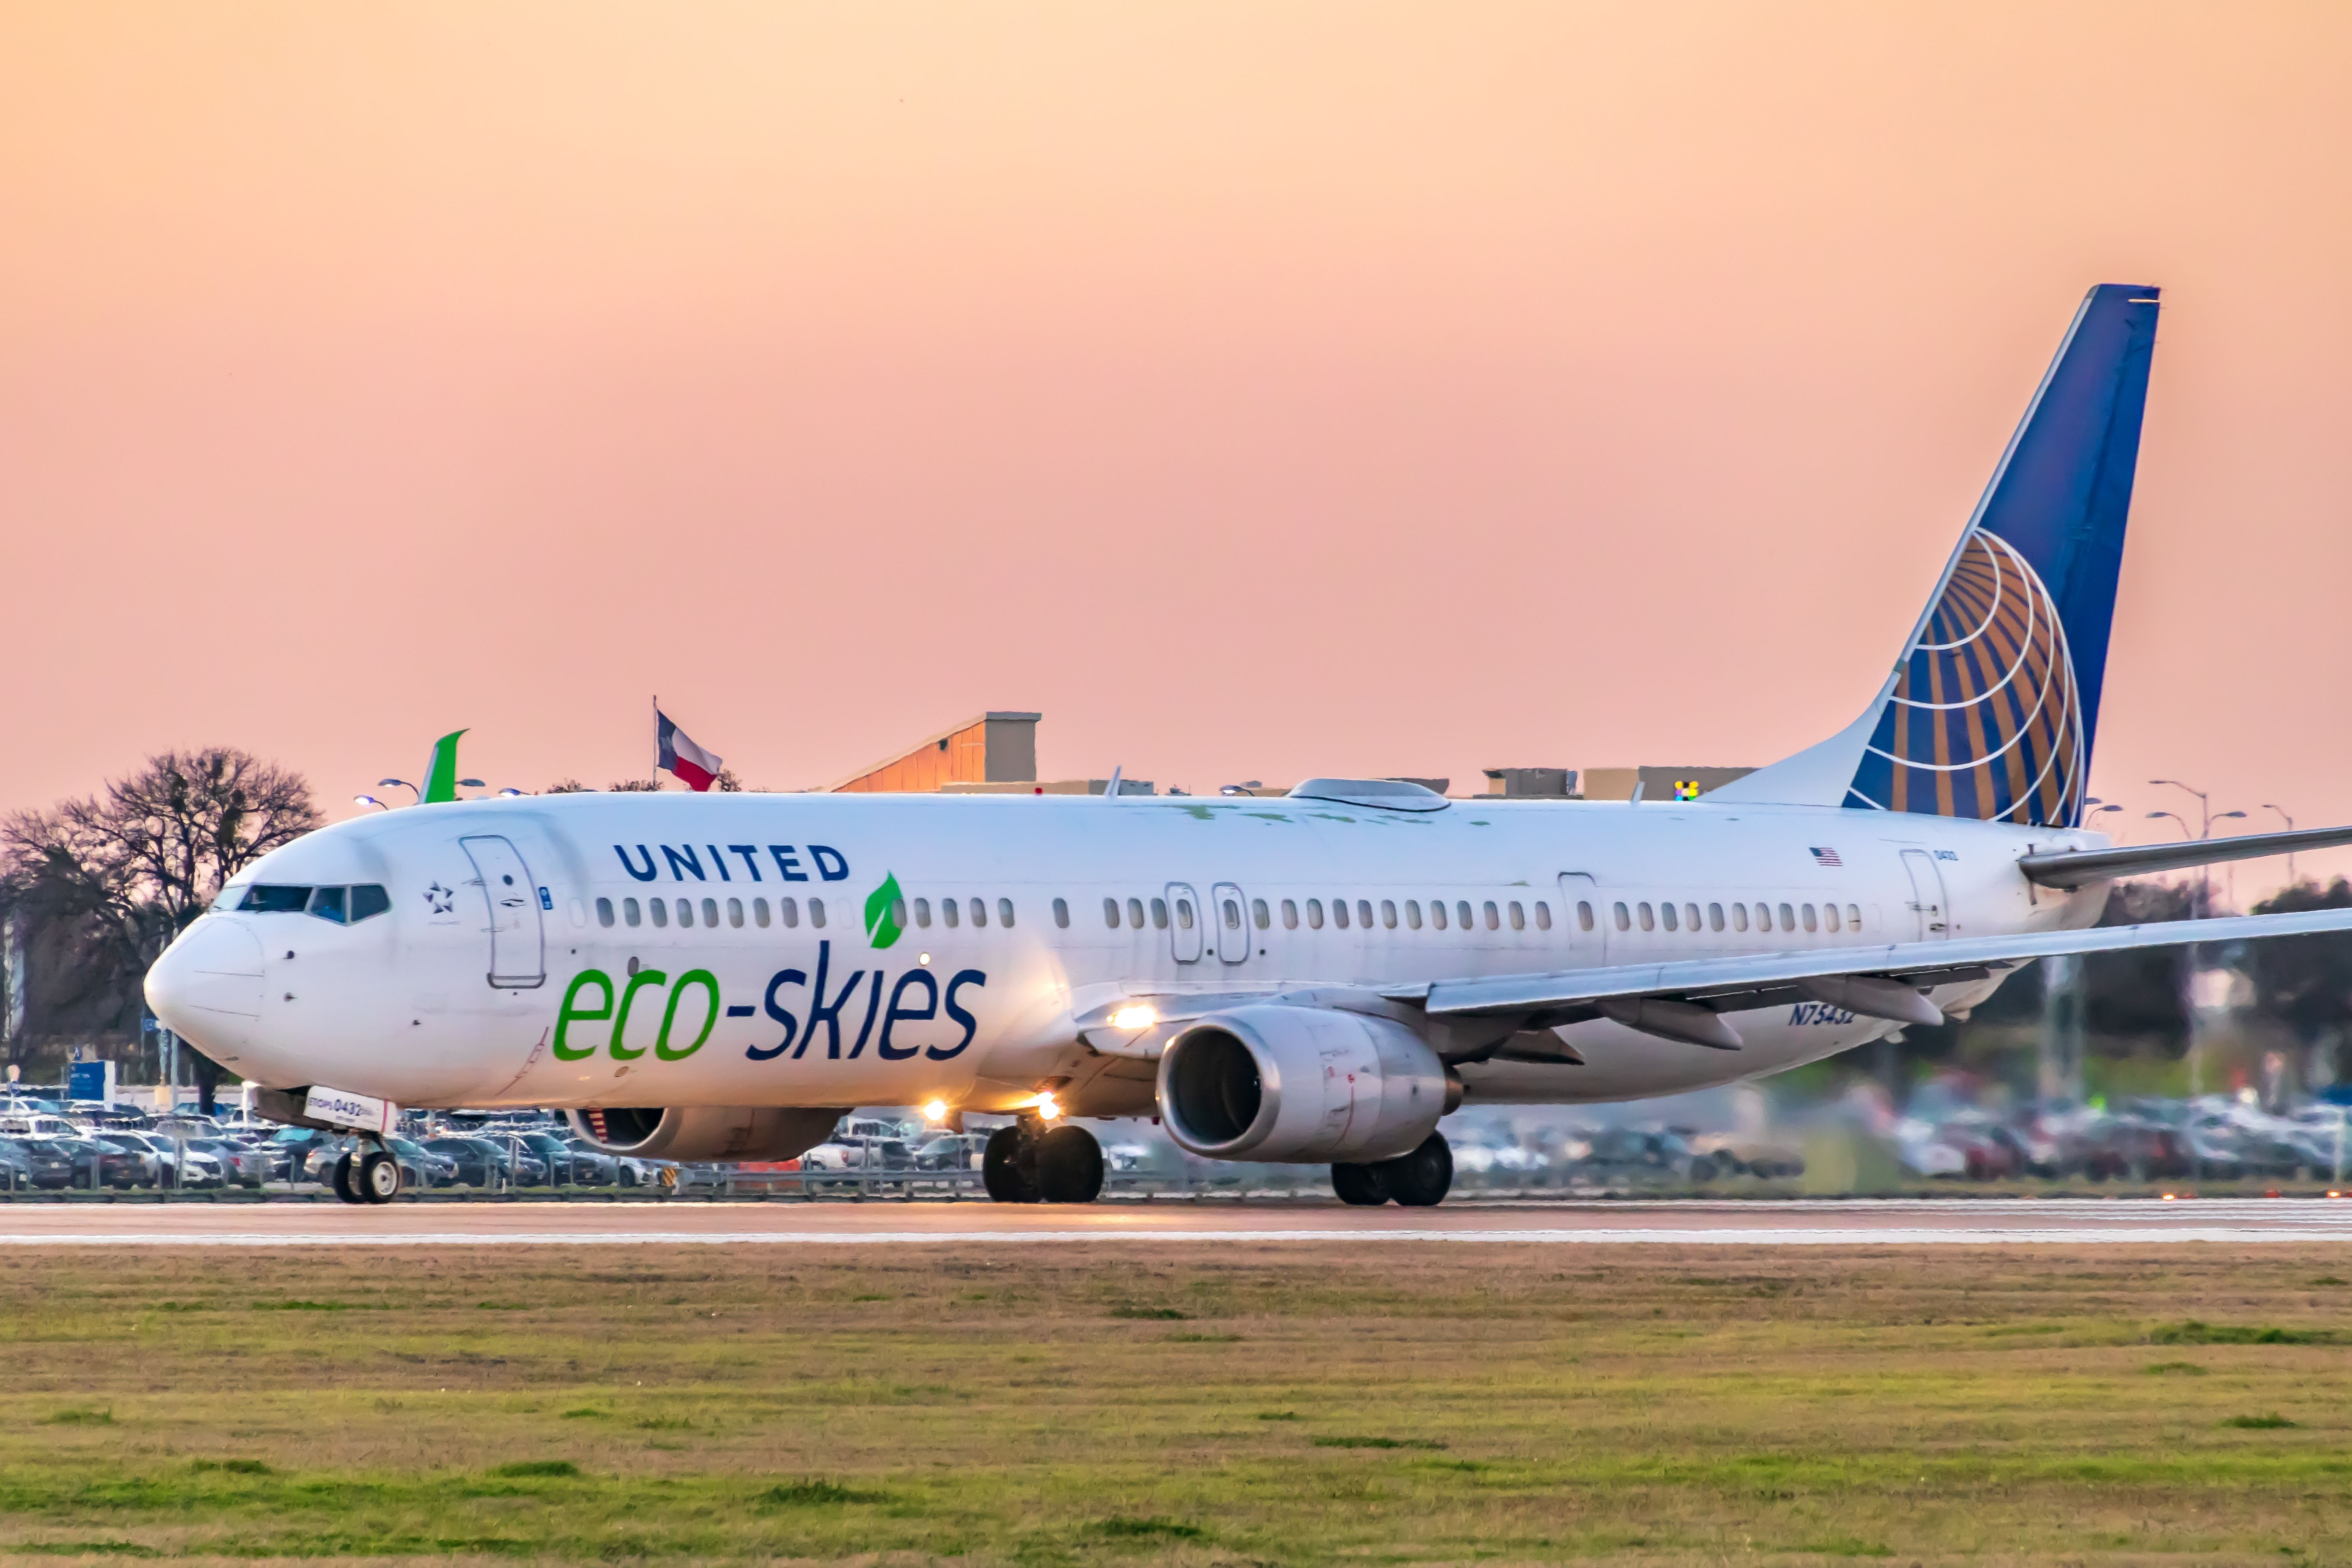 United Airlines Boeing 737-924ER in the Eco-Skies livery taking off from Runway 18L at Austin Bergstrom International Airport.